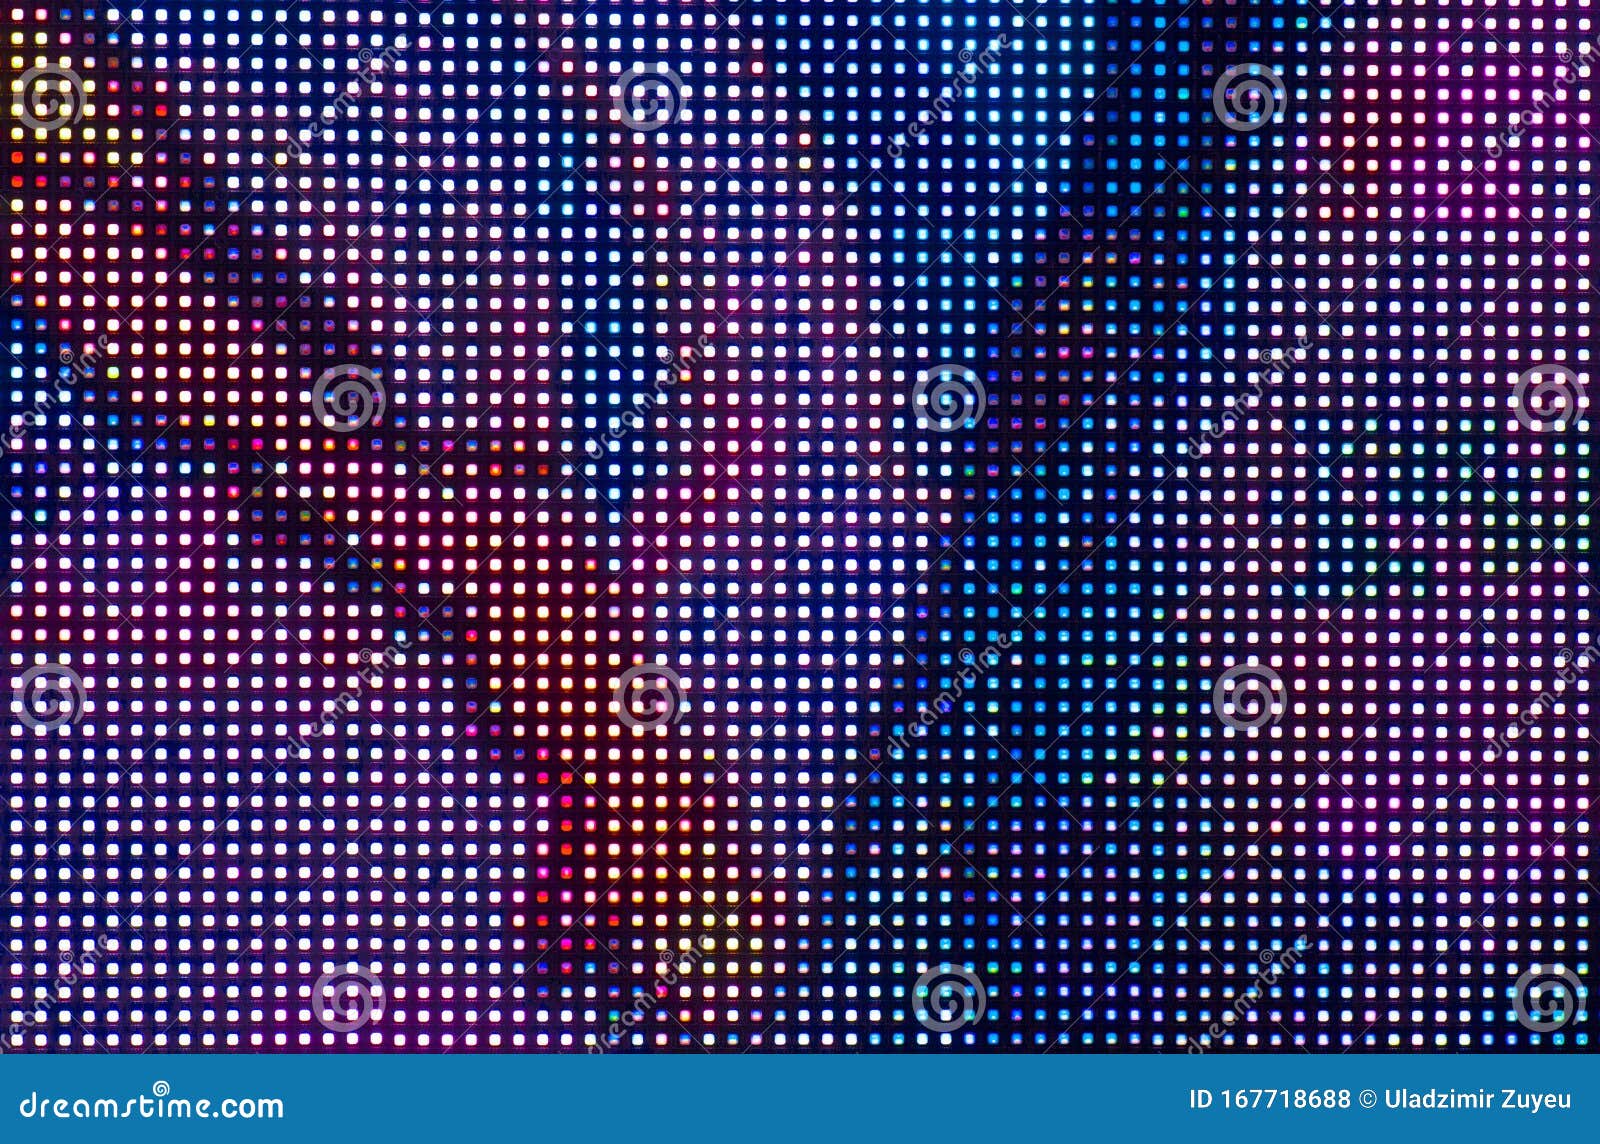 114 Color Tv Grid Screen Background Photos Free Royalty Free Stock Photos From Dreamstime